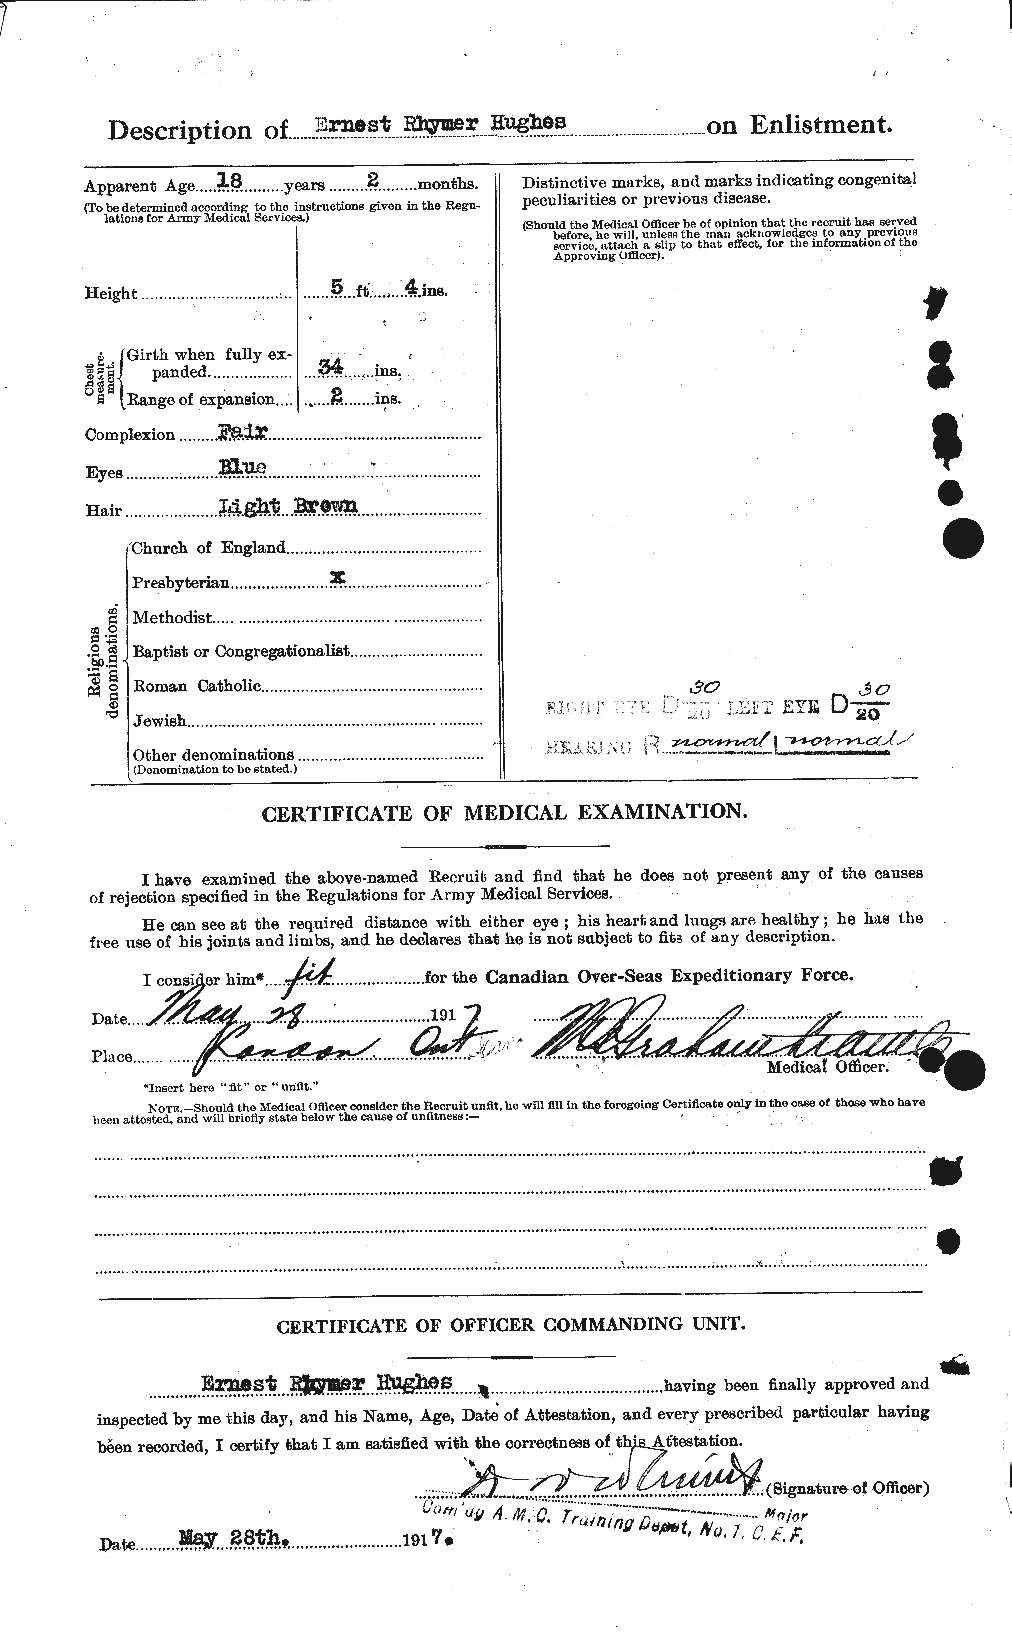 Personnel Records of the First World War - CEF 403755b